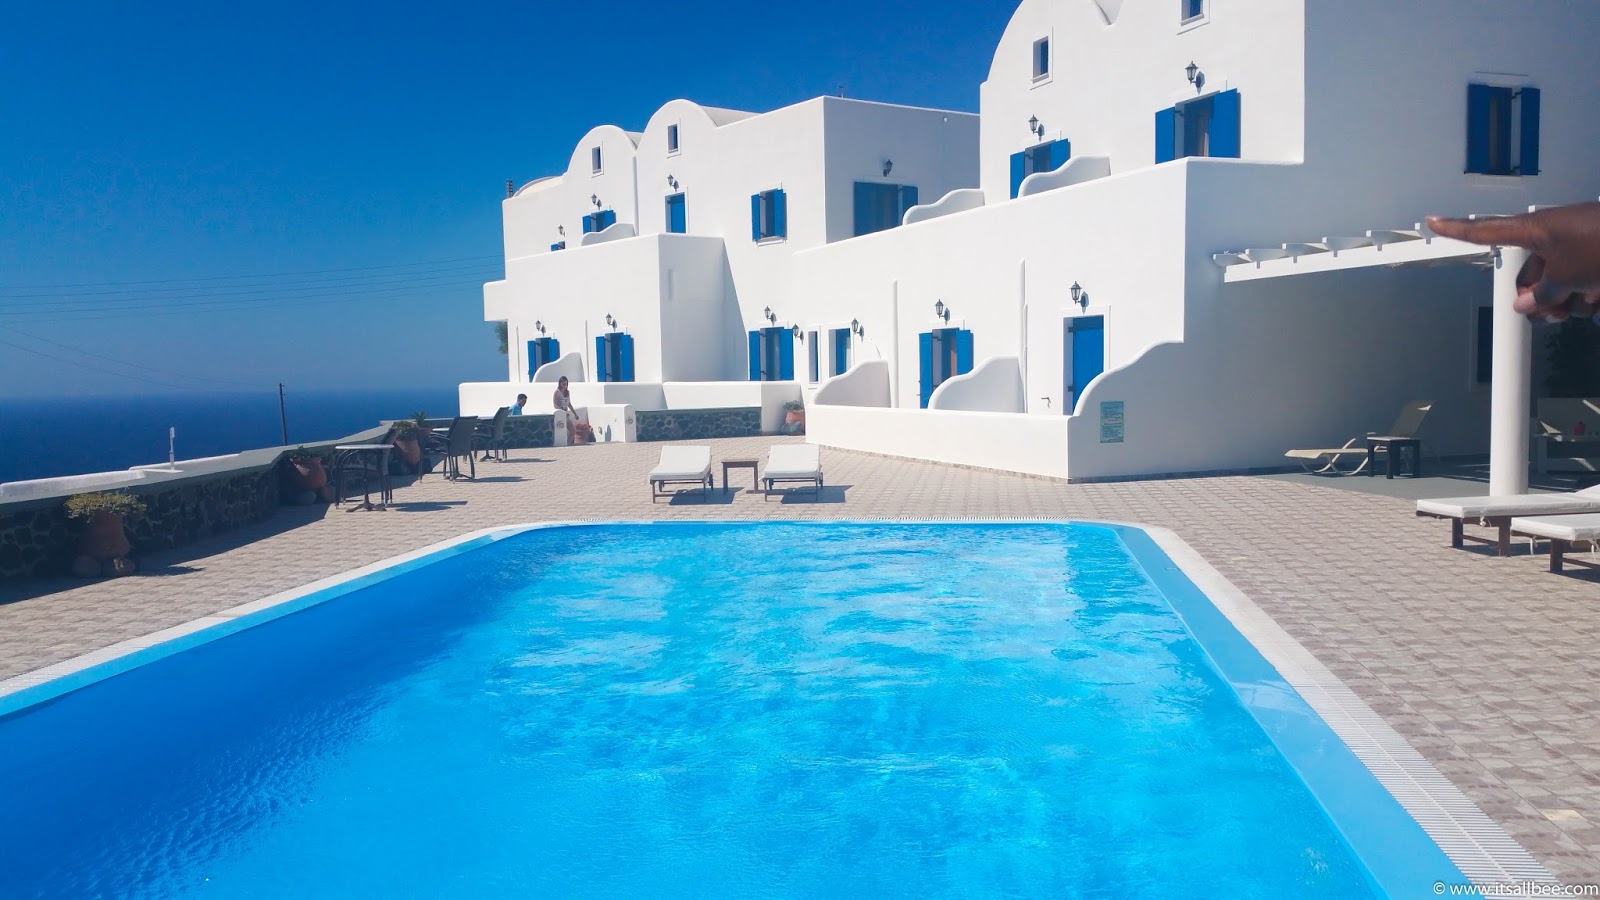 top hotels in santorini - The Best Hotels In Santorini | Where To Stay On The Greek Island